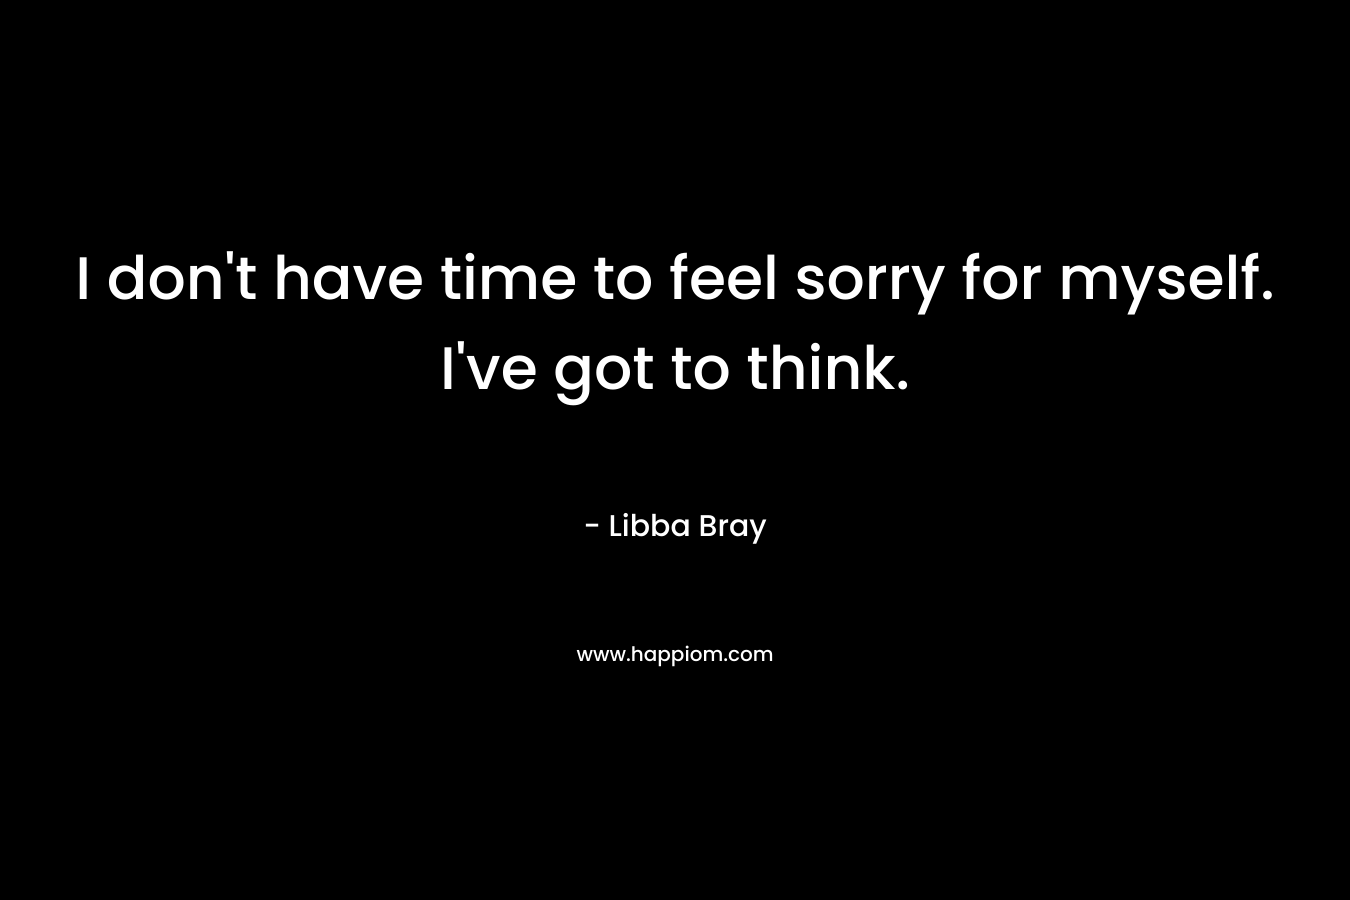 I don’t have time to feel sorry for myself. I’ve got to think. – Libba Bray